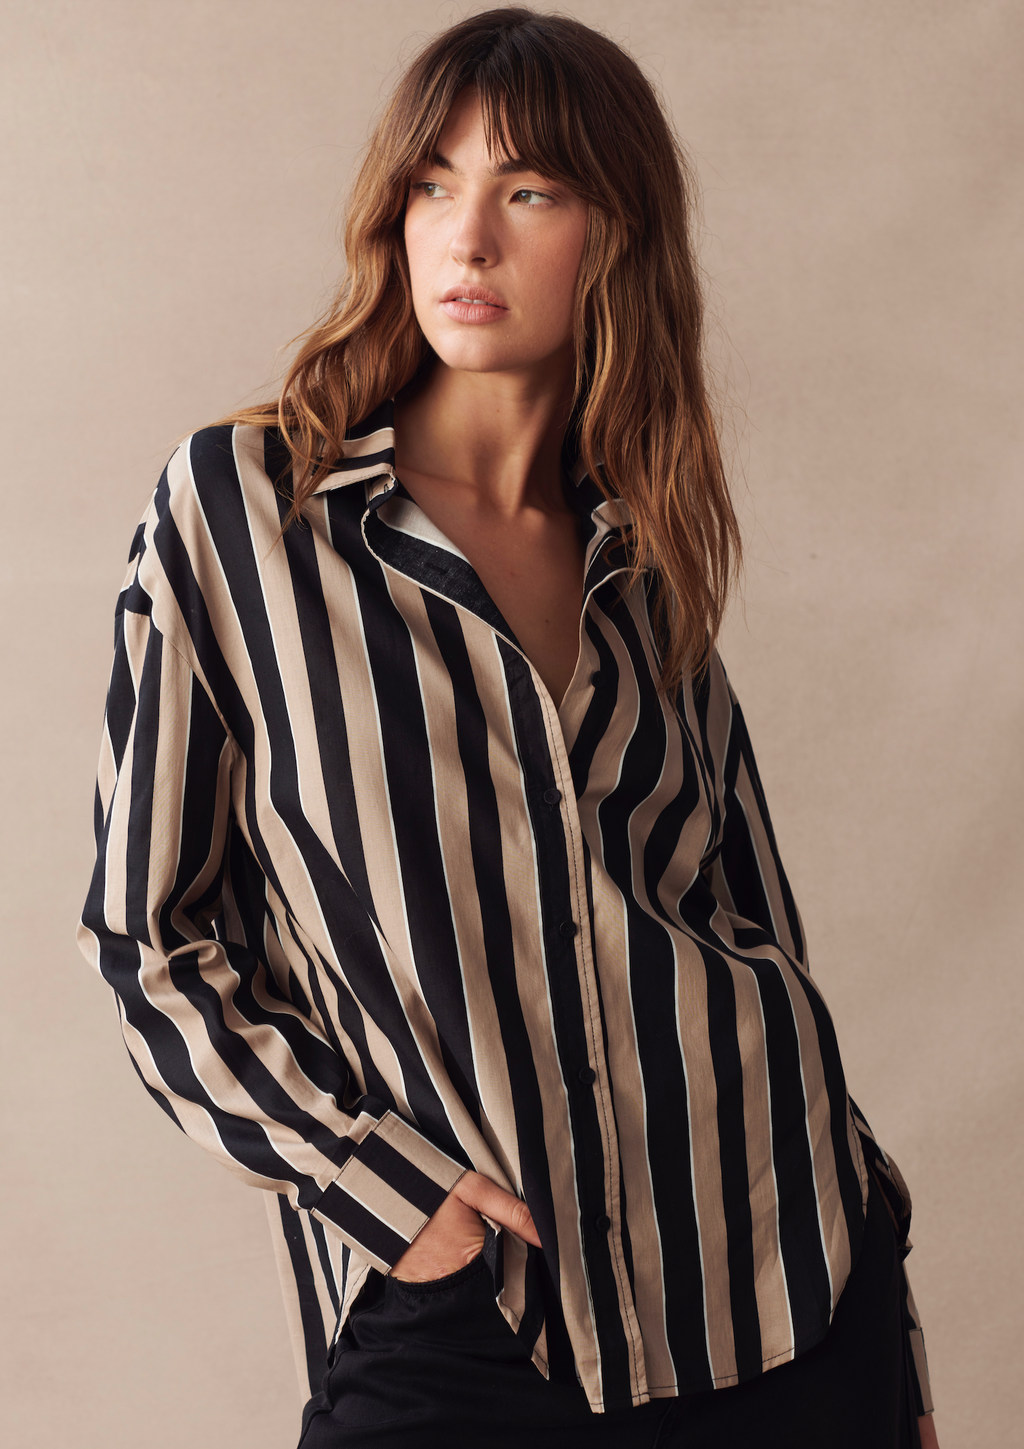 jordie shirt by little lies is a stripe button up collared shirt